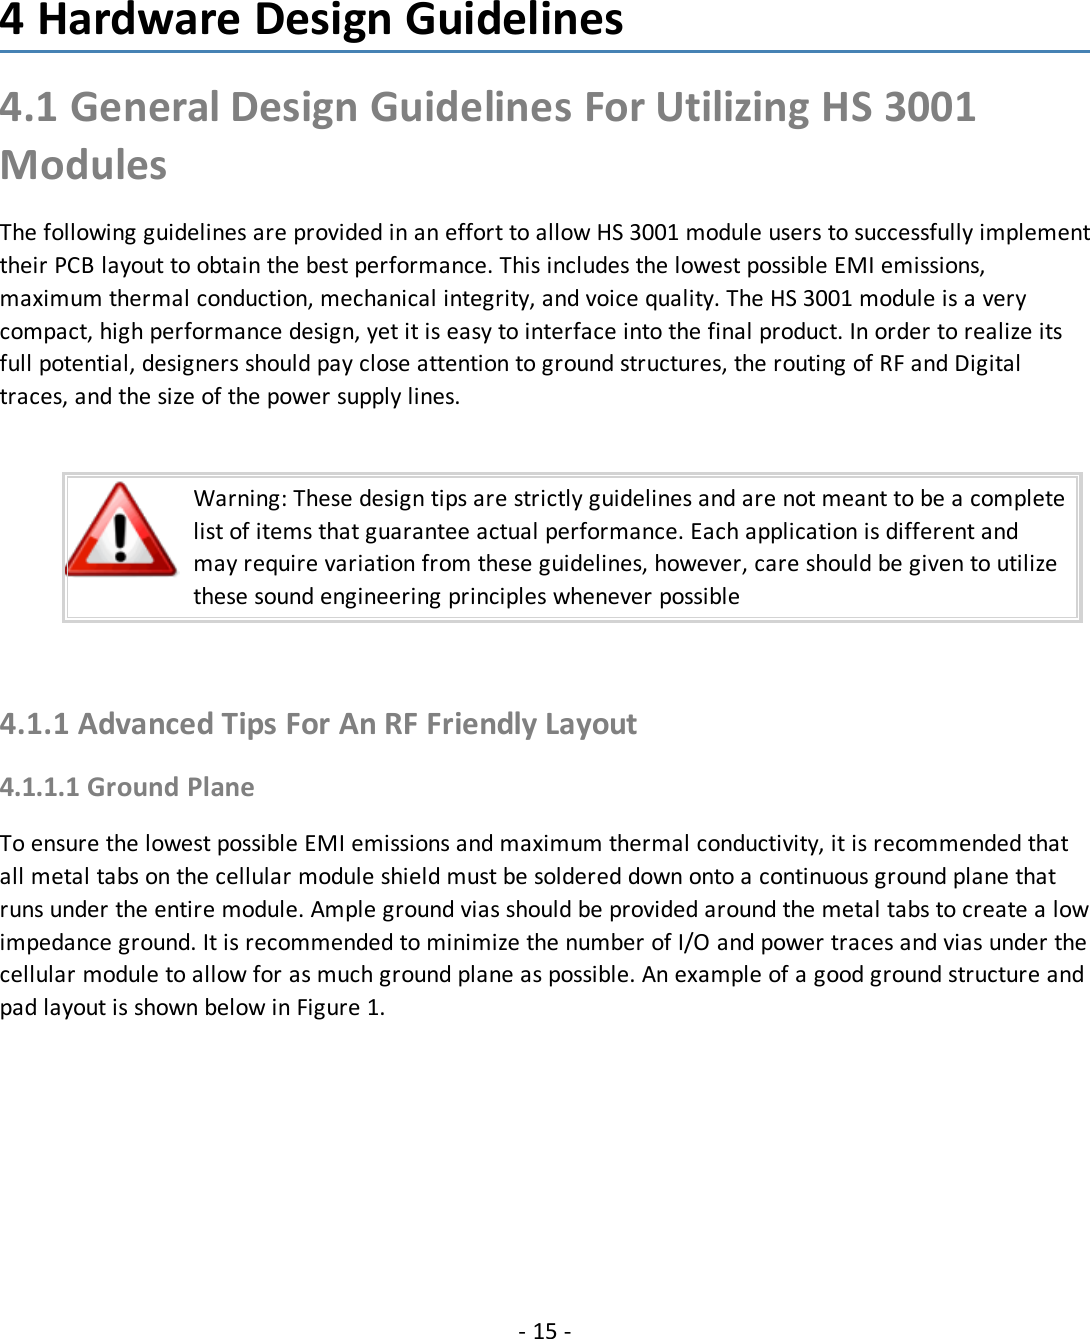 4 Hardware Design Guidelines4.1 General Design Guidelines For Utilizing HS 3001ModulesThe following guidelines are provided in an effort to allow HS 3001 module users to successfully implementtheir PCB layout to obtain the best performance. This includes the lowest possible EMI emissions,maximum thermal conduction, mechanical integrity, and voice quality. The HS 3001 module is a verycompact, high performance design, yet it is easy to interface into the final product. In order to realize itsfull potential, designers should pay close attention to ground structures, the routing of RF and Digitaltraces, and the size of the power supply lines.Warning: These design tips are strictly guidelines and are not meant to be a completelist of items that guarantee actual performance. Each application is different andmay require variation from these guidelines, however, care should be given to utilizethese sound engineering principles whenever possible4.1.1 Advanced Tips For An RF Friendly Layout4.1.1.1 Ground PlaneTo ensure the lowest possible EMI emissions and maximum thermal conductivity, it is recommended thatall metal tabs on the cellular module shield must be soldered down onto a continuous ground plane thatruns under the entire module. Ample ground vias should be provided around the metal tabs to create a lowimpedance ground. It is recommended to minimize the number of I/O and power traces and vias under thecellular module to allow for as much ground plane as possible. An example of a good ground structure andpad layout is shown below in Figure 1.- 15 -